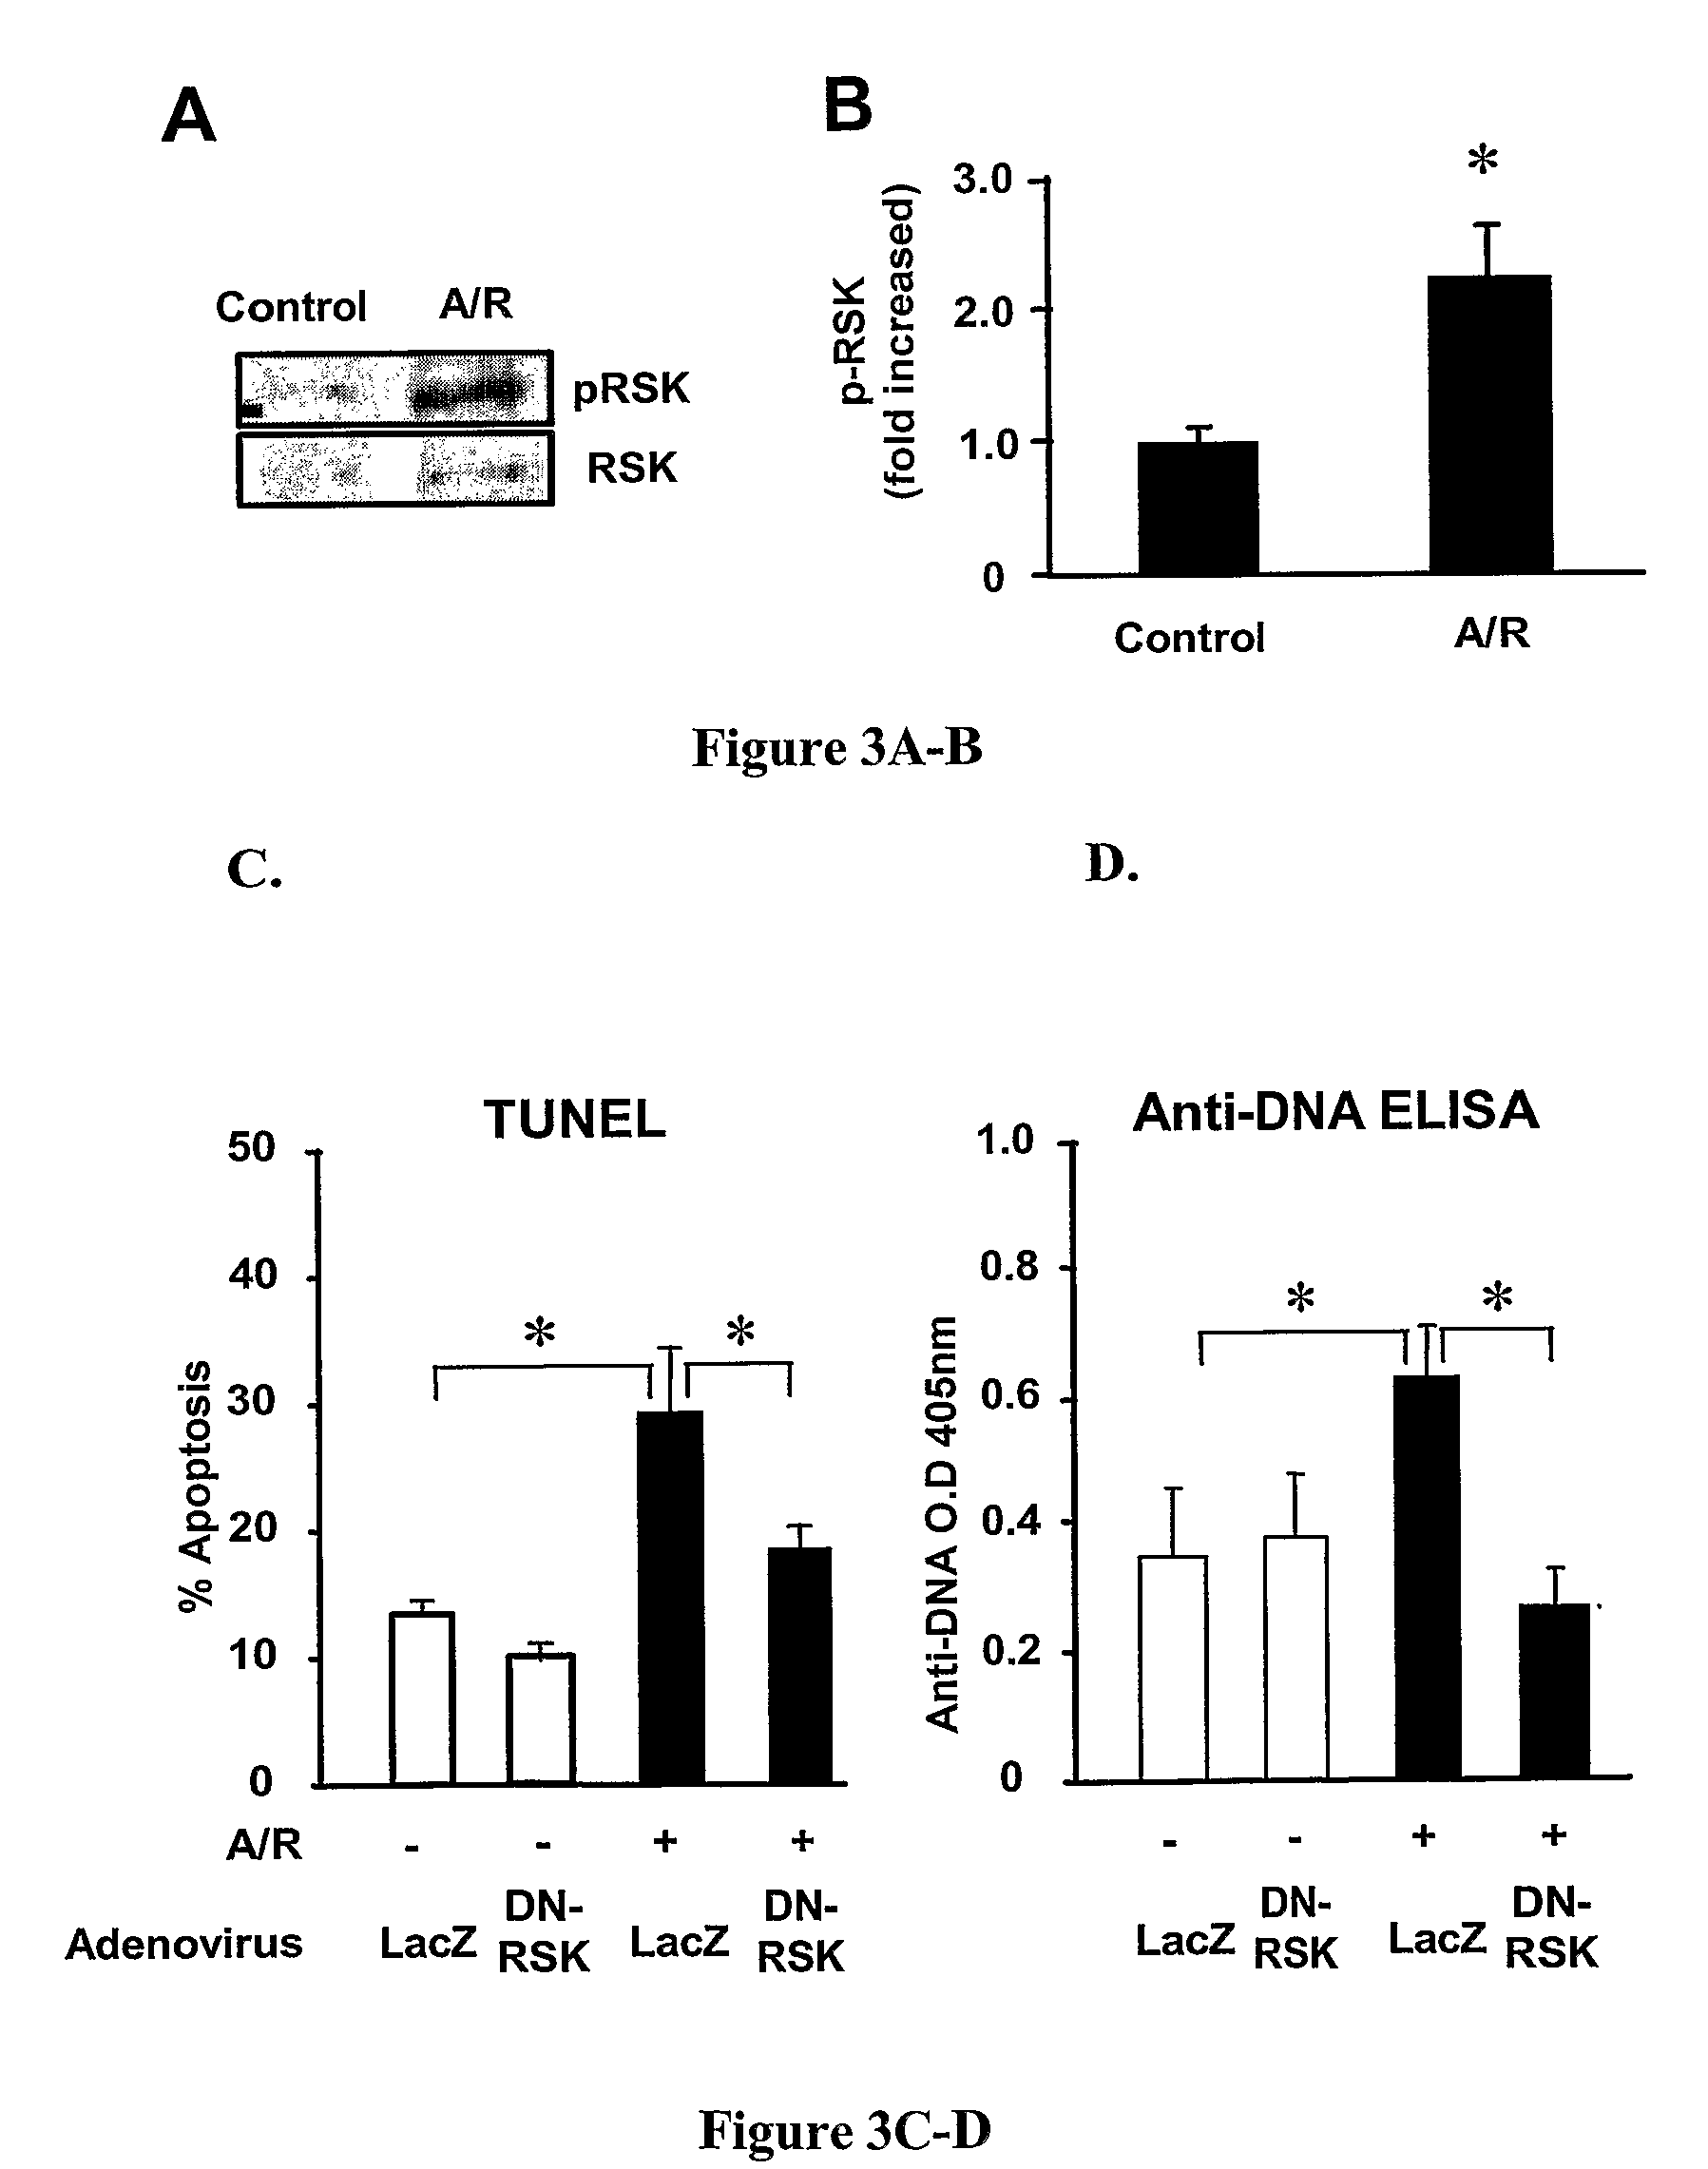 Transgenic Non-Human Animal Models of Ischemia-Reperfusion Injury and Uses Thereof